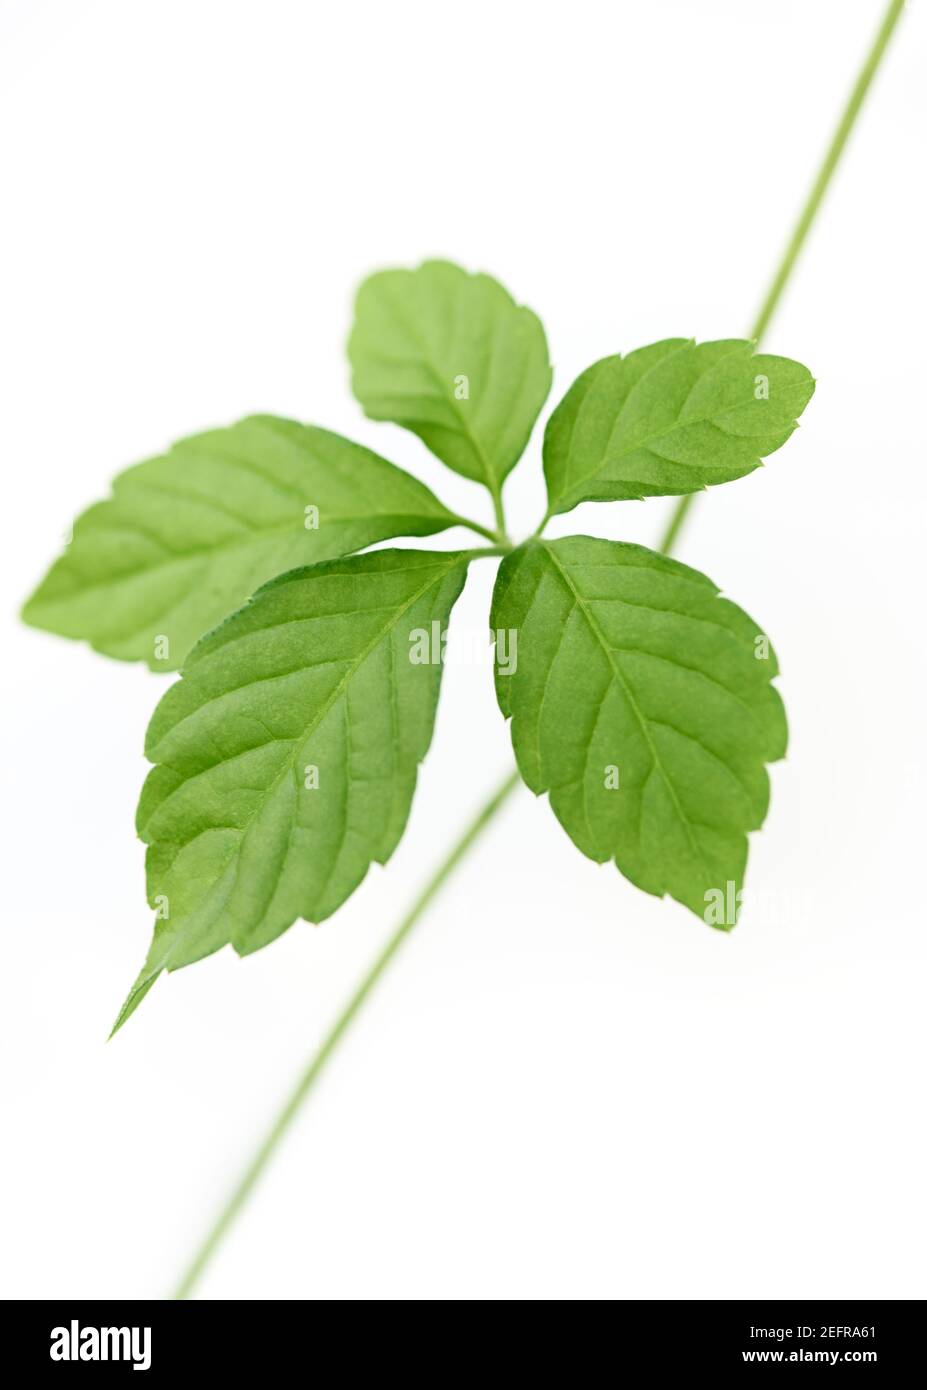 Jiaogulan, Gynostemma pentaphyllum, Jiao Gu Lan, closeup green plant leaves isolated on white studio background. Jiaogulan is used as a herb and in te Stock Photo